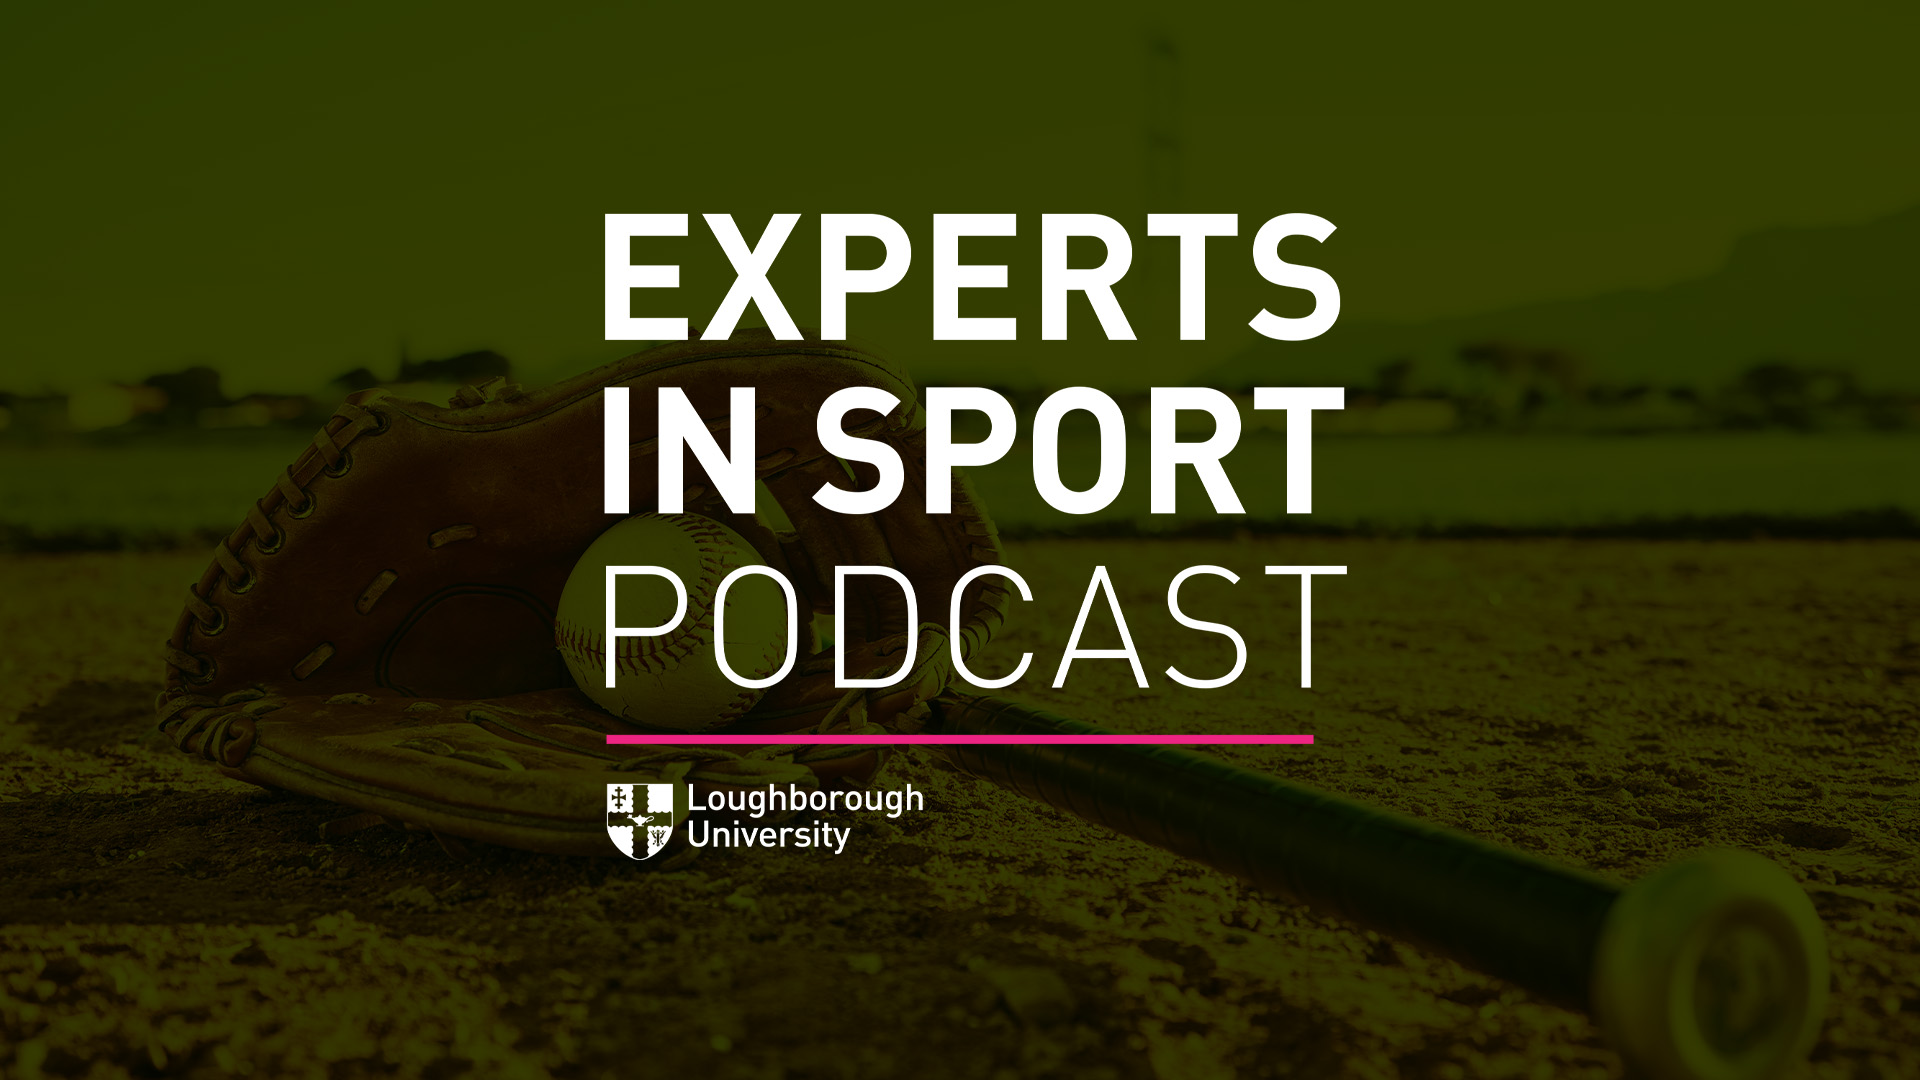 Image of a baseball mitt and bat with the 'Experts in Sport' logo overlaid